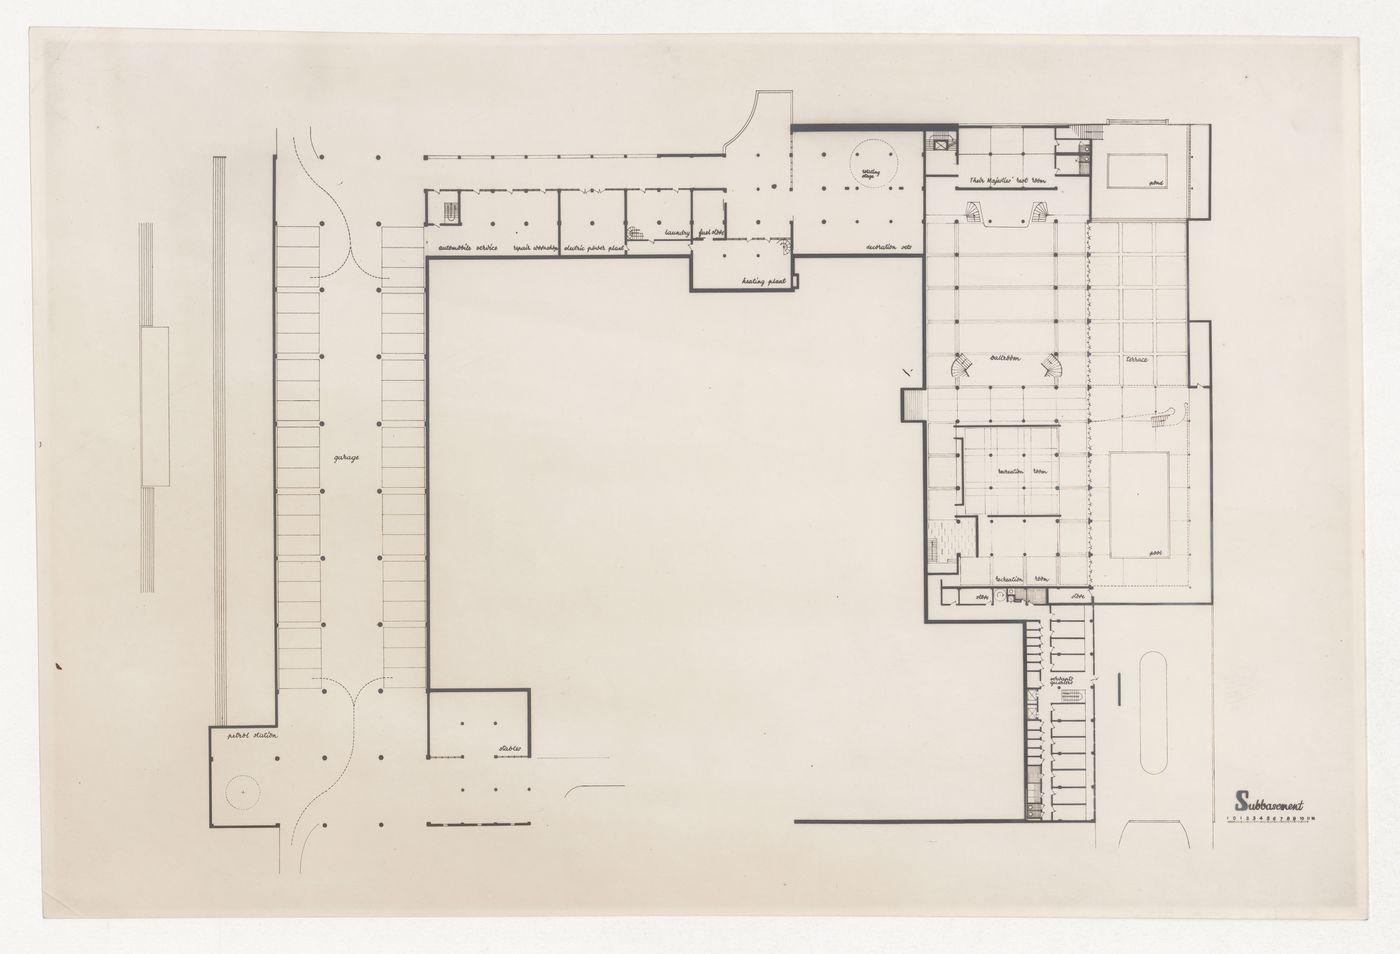 Subbasement plan for Government House, Addis Ababa, Ethiopia